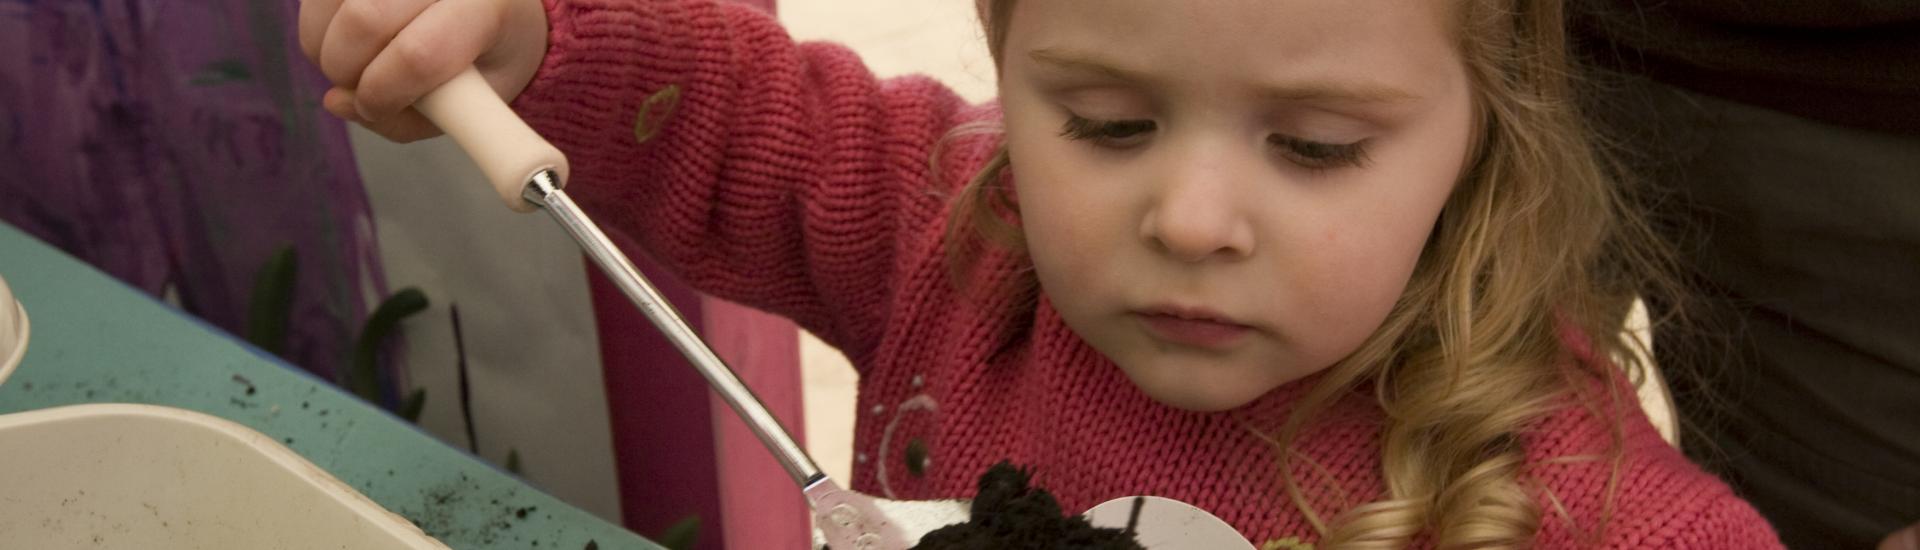 A young girl putting a spoon of soil into a paper cup 